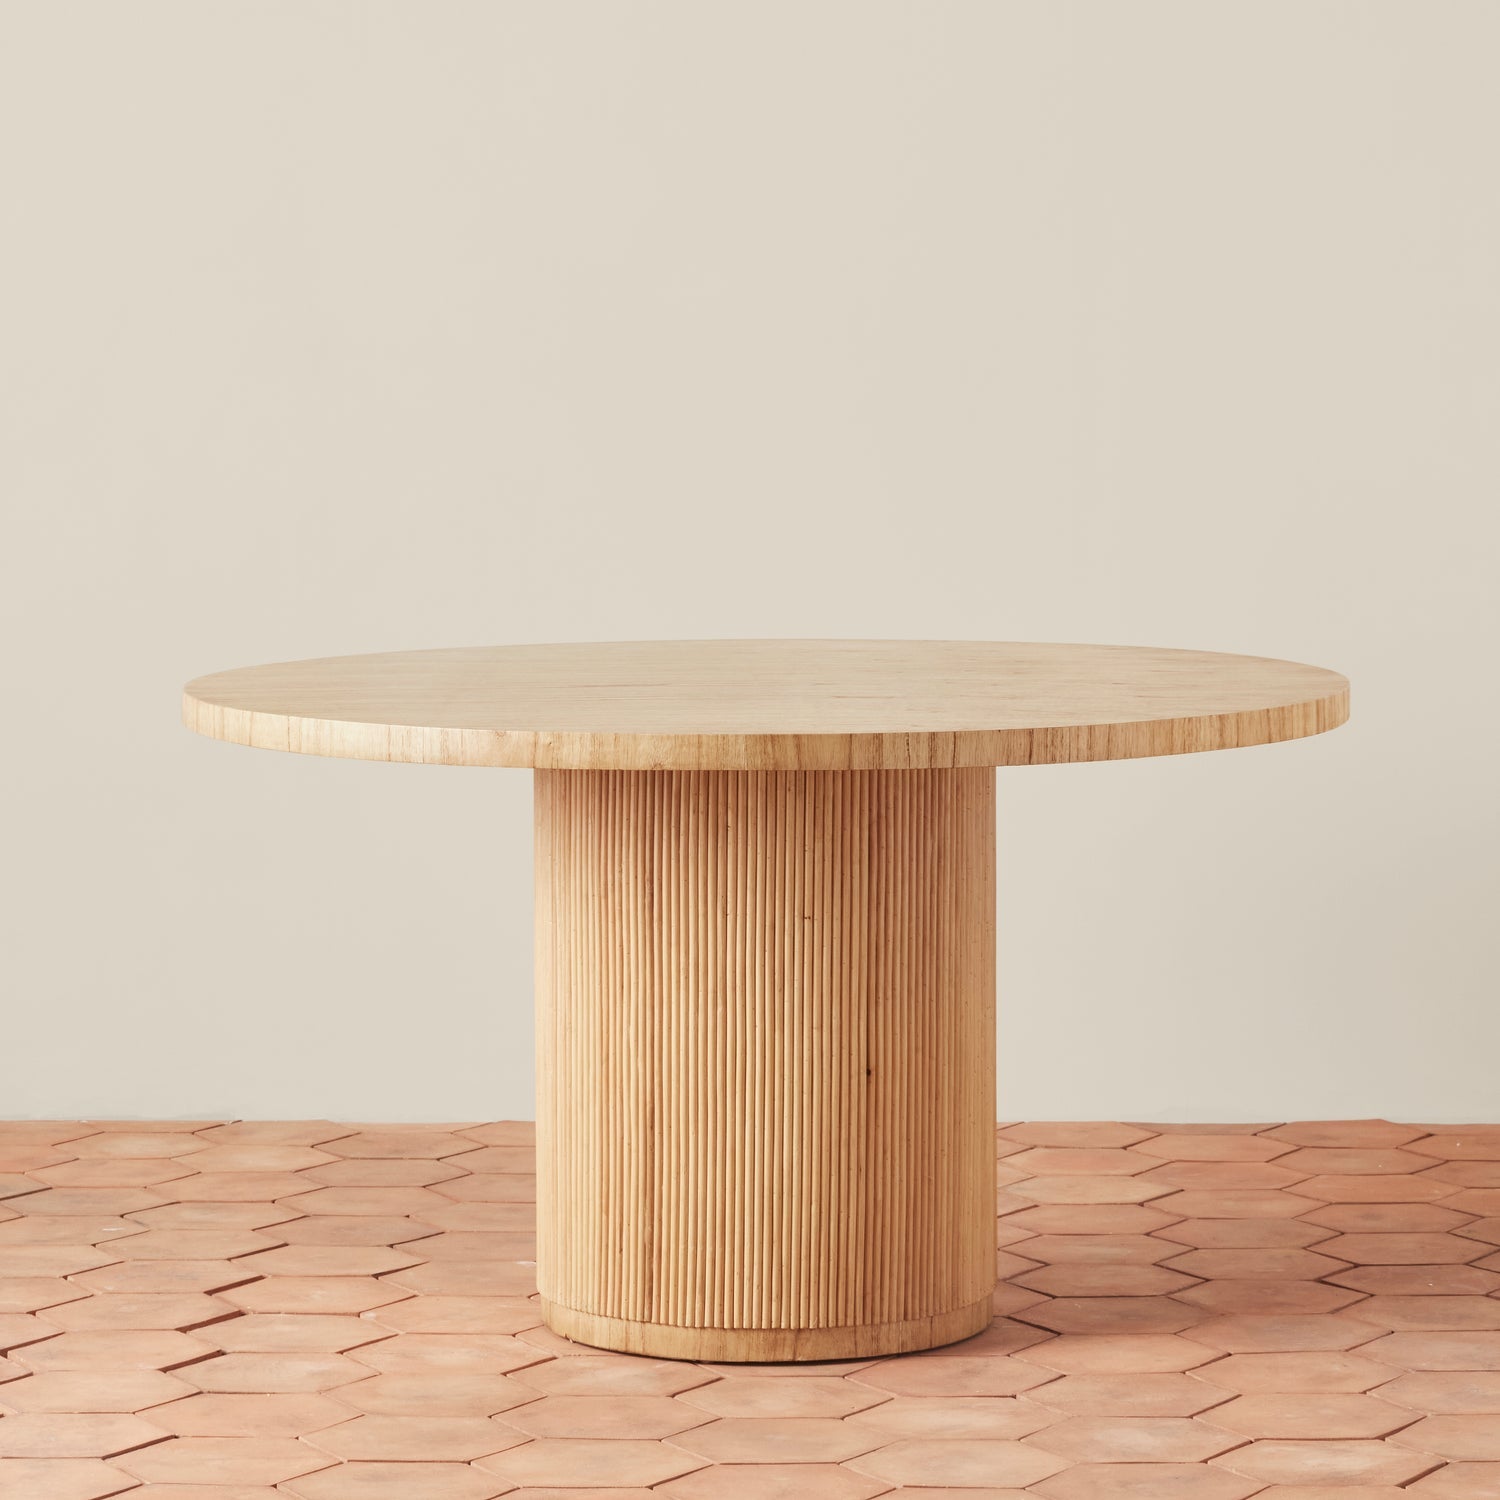 On a neutral background is a round wood table with a round fluted base.